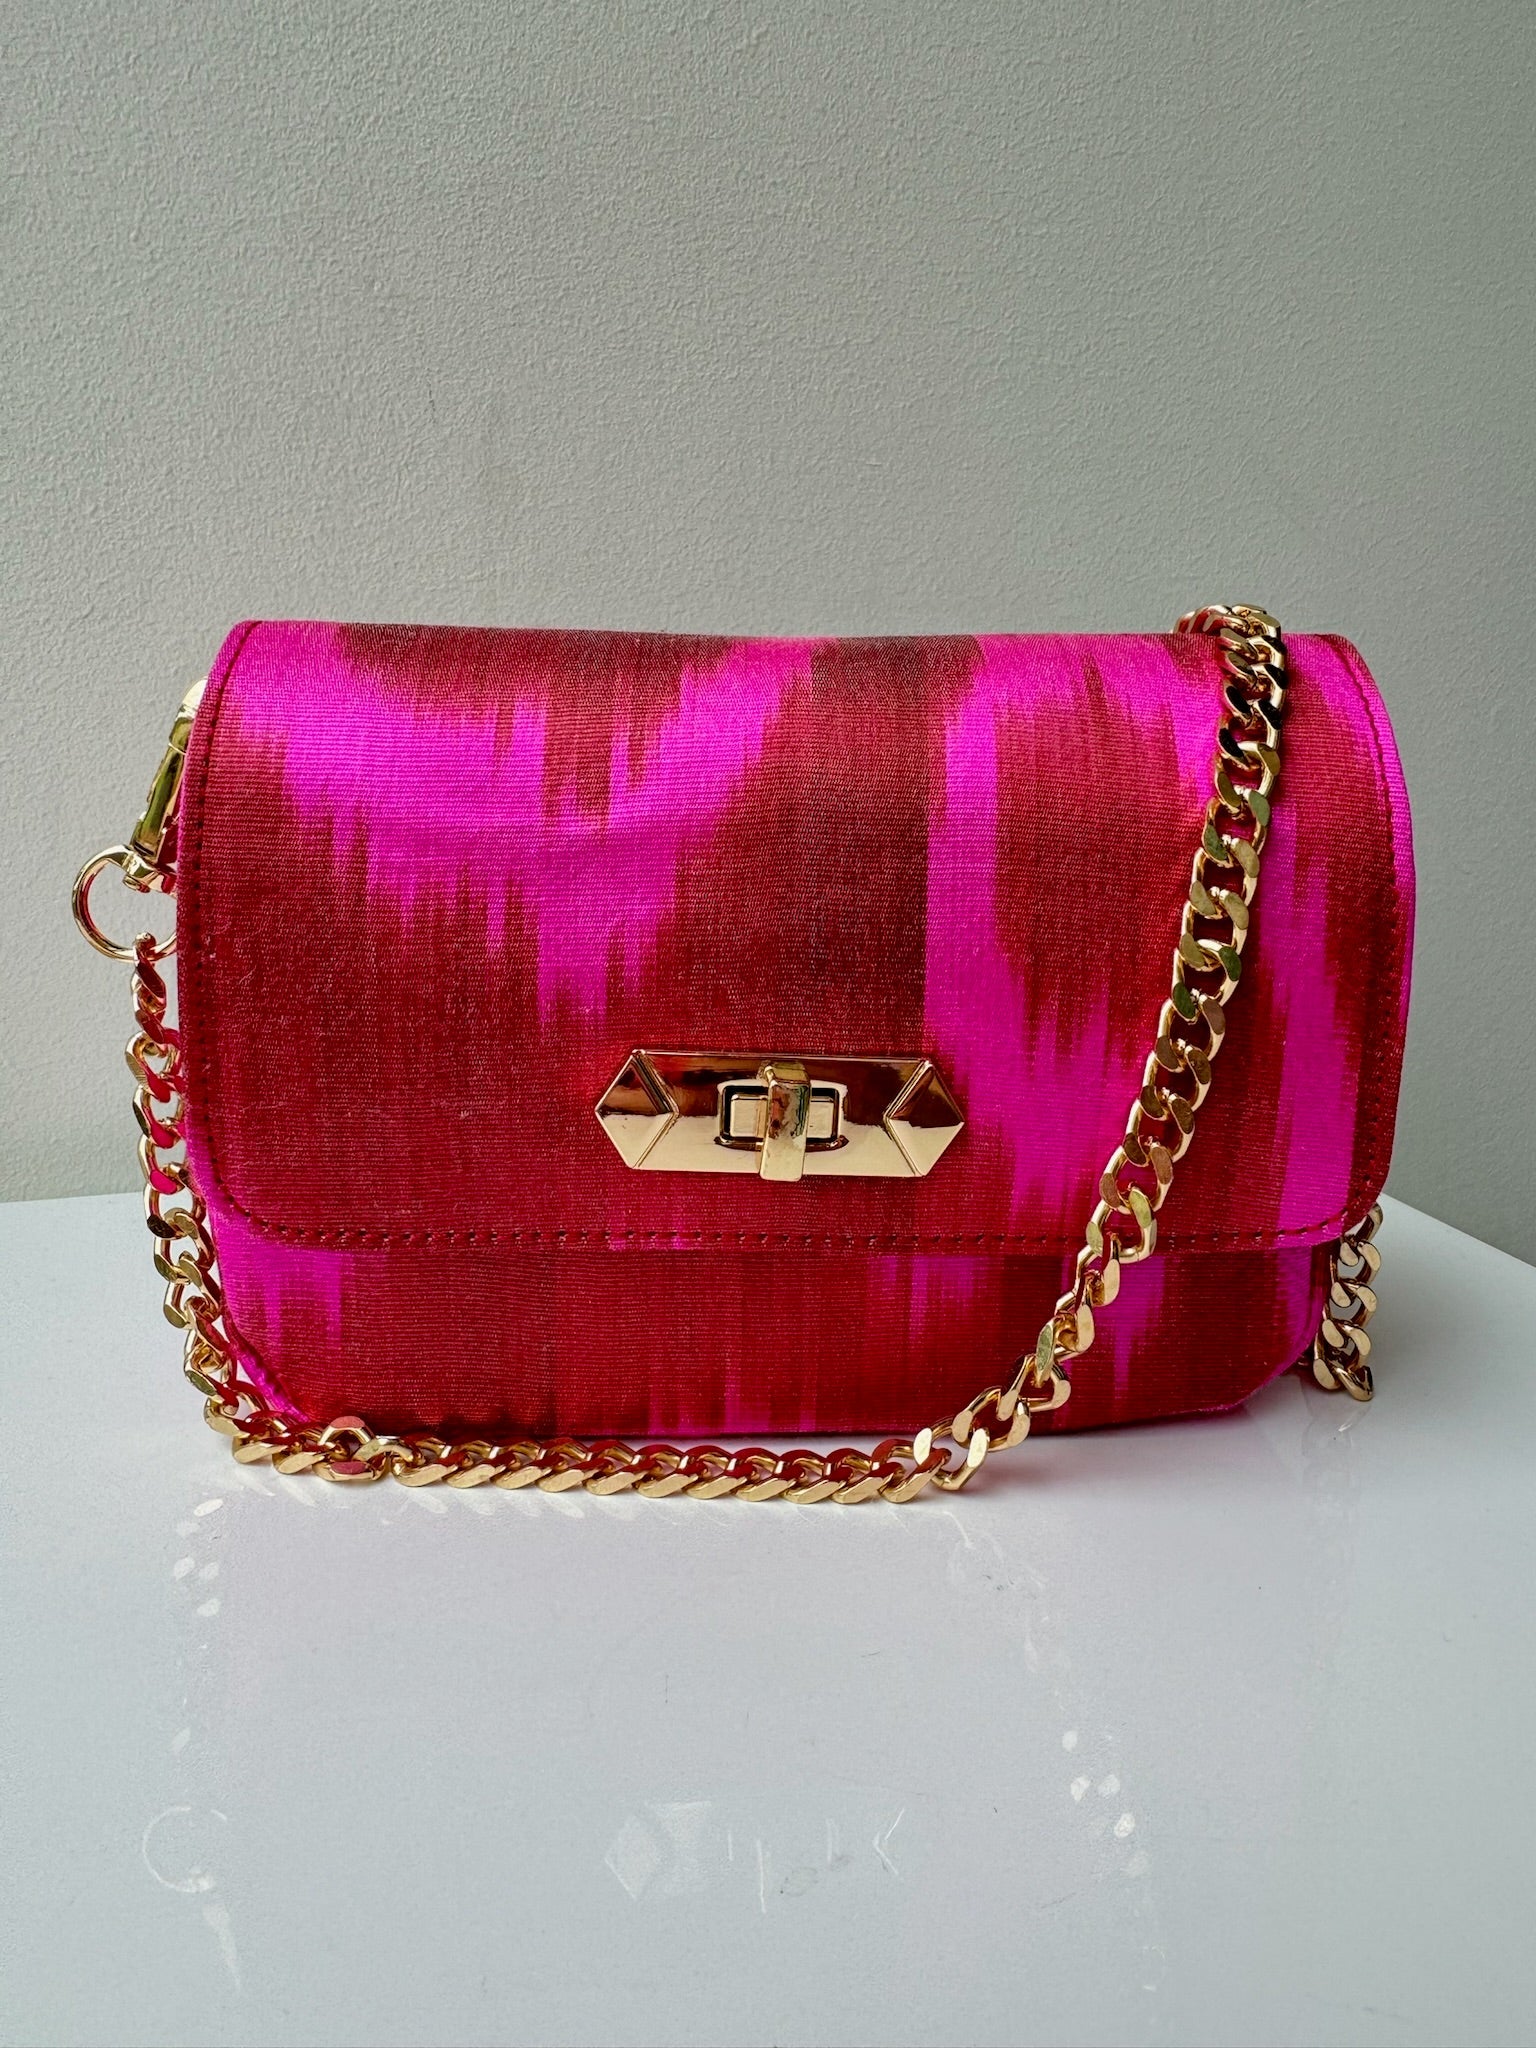 Hot Pink/Red Kimmie Bag - Amor Lafayette